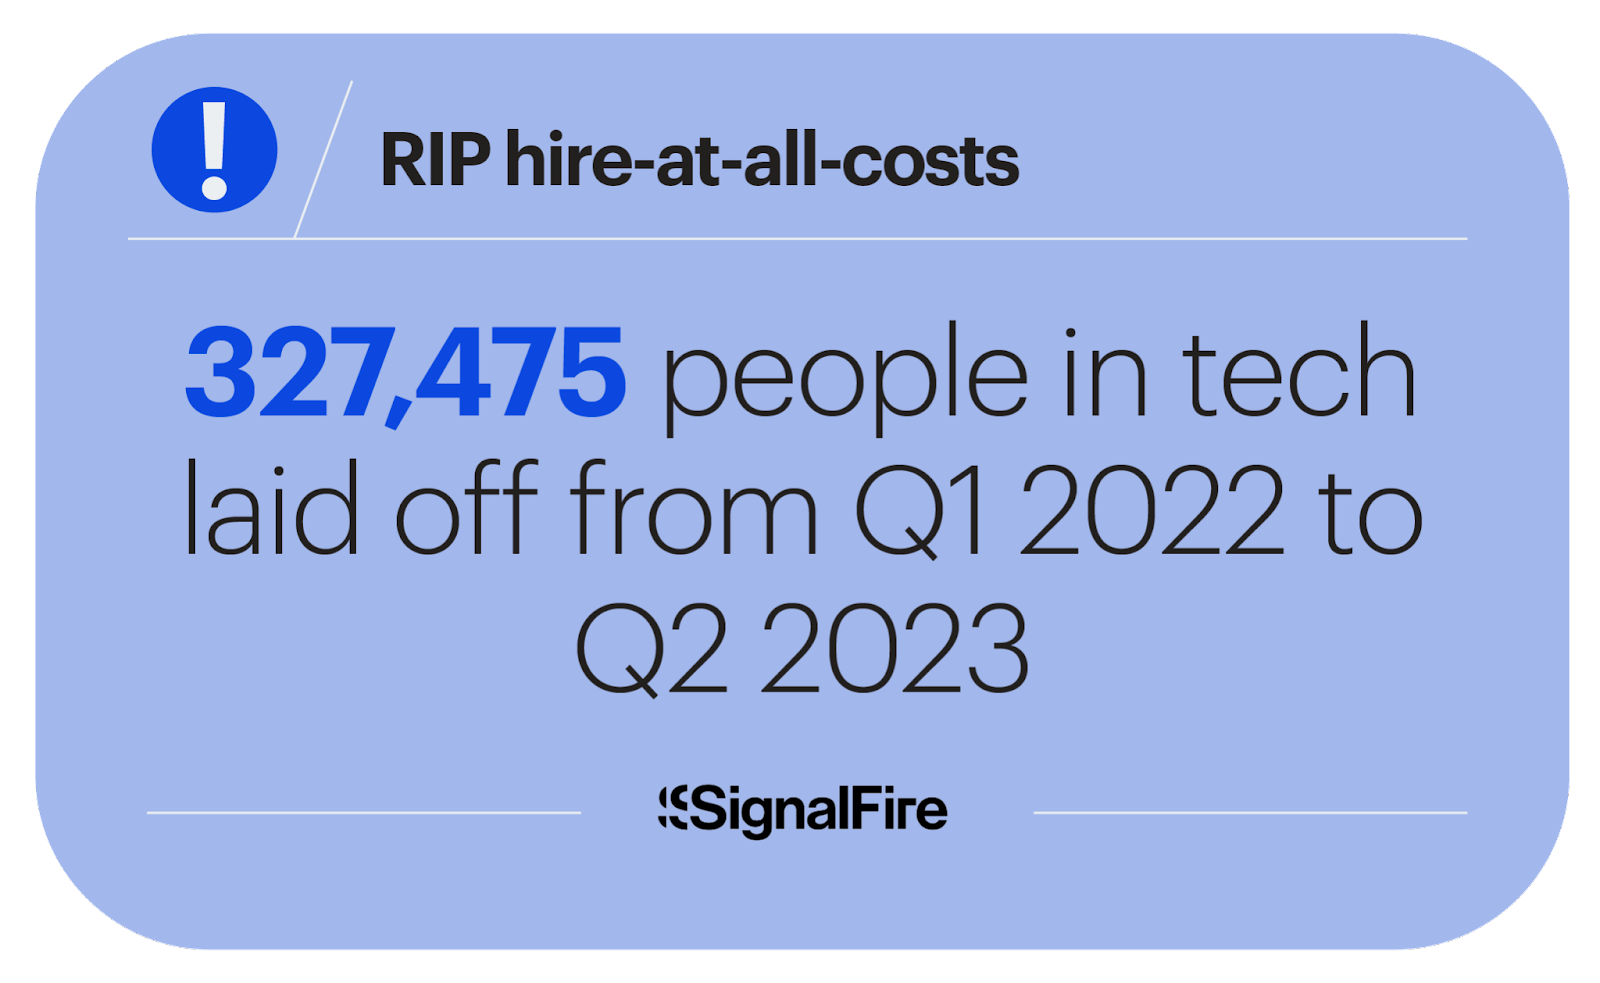 Between Q1 2022 and Q2 2023, 327,475 tech workers will be laid off